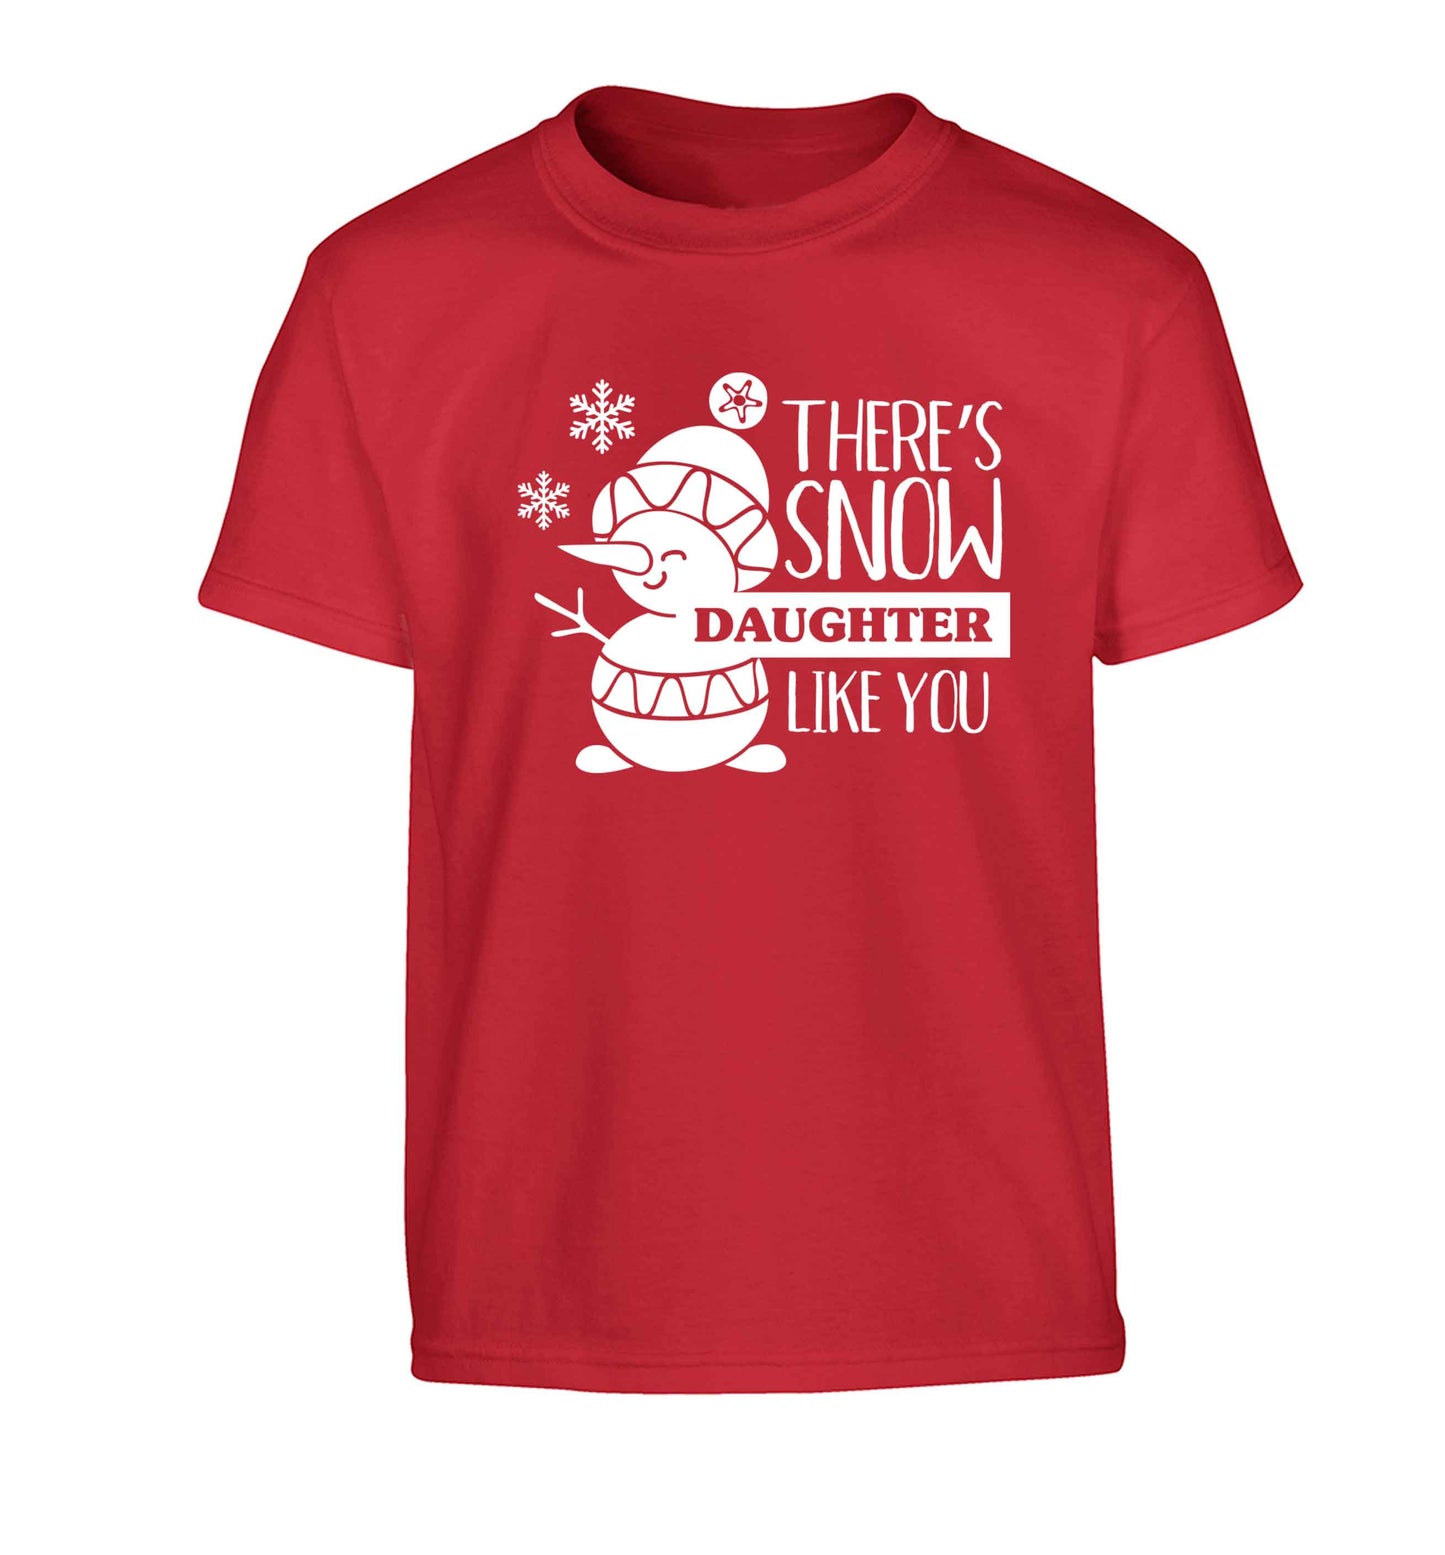 There's snow daughter like you Children's red Tshirt 12-13 Years